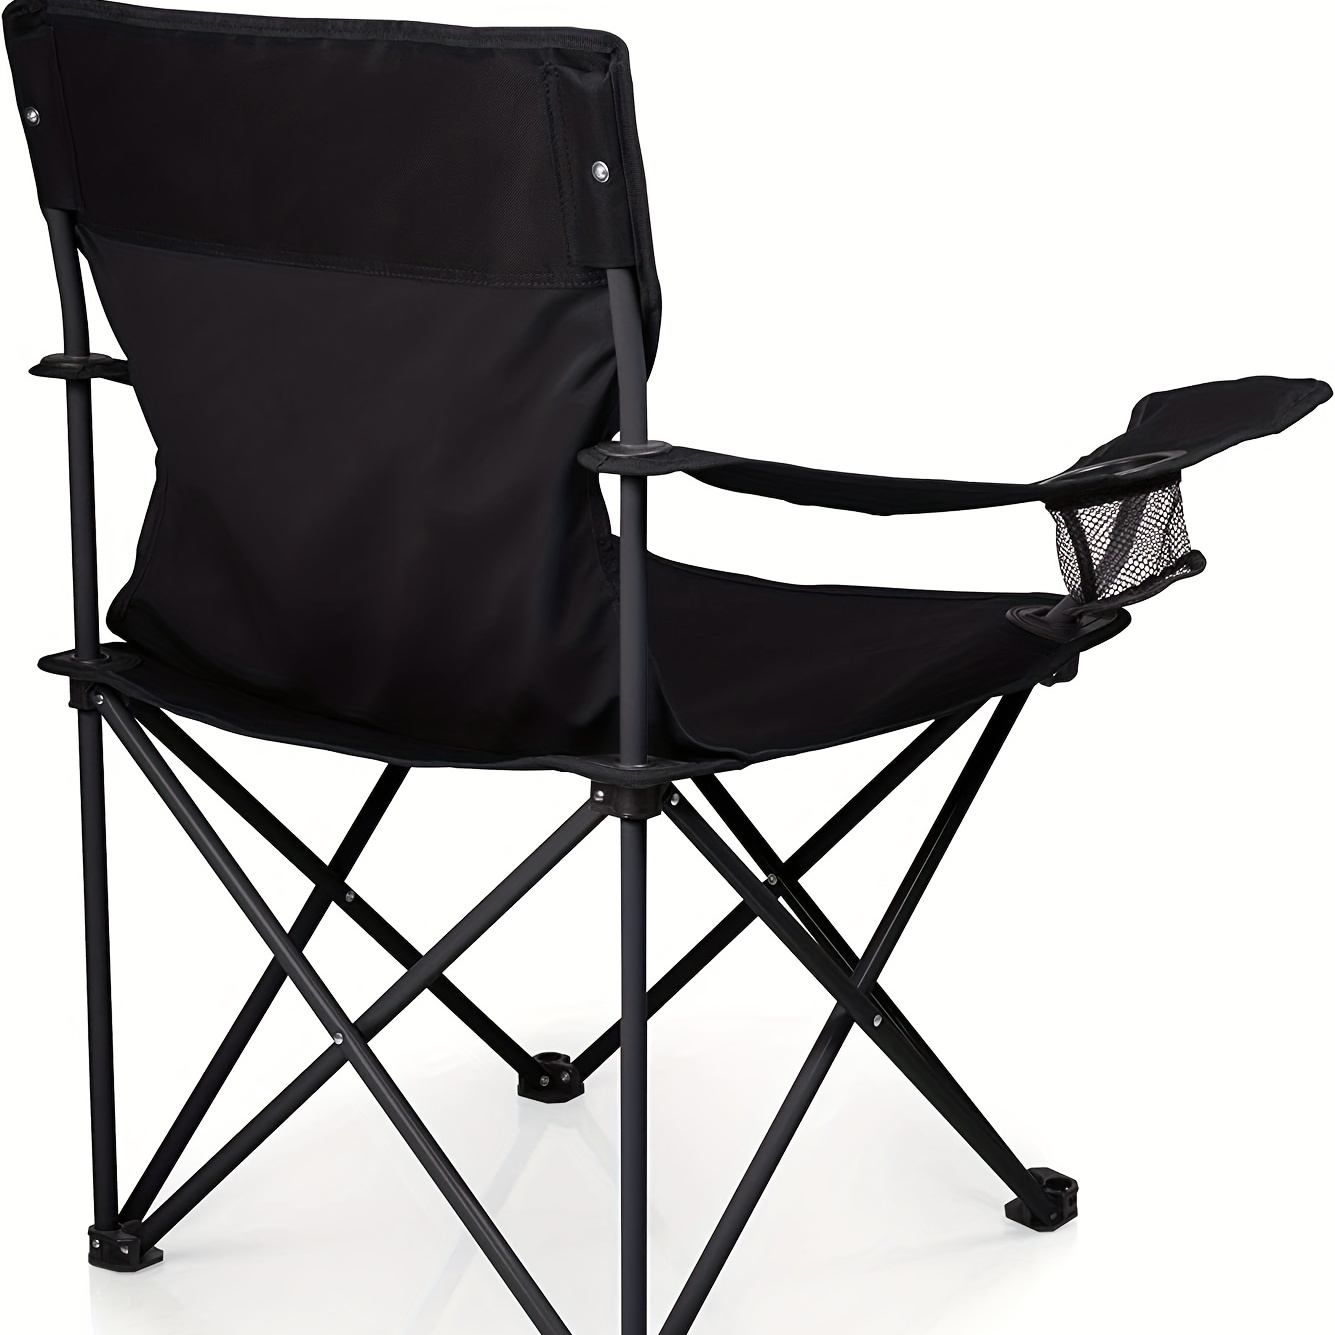 Heavy-Duty Portable Camping Chair: Lightweight, Pocket & Bottle Holder,  Perfect For Hiking & Beach!